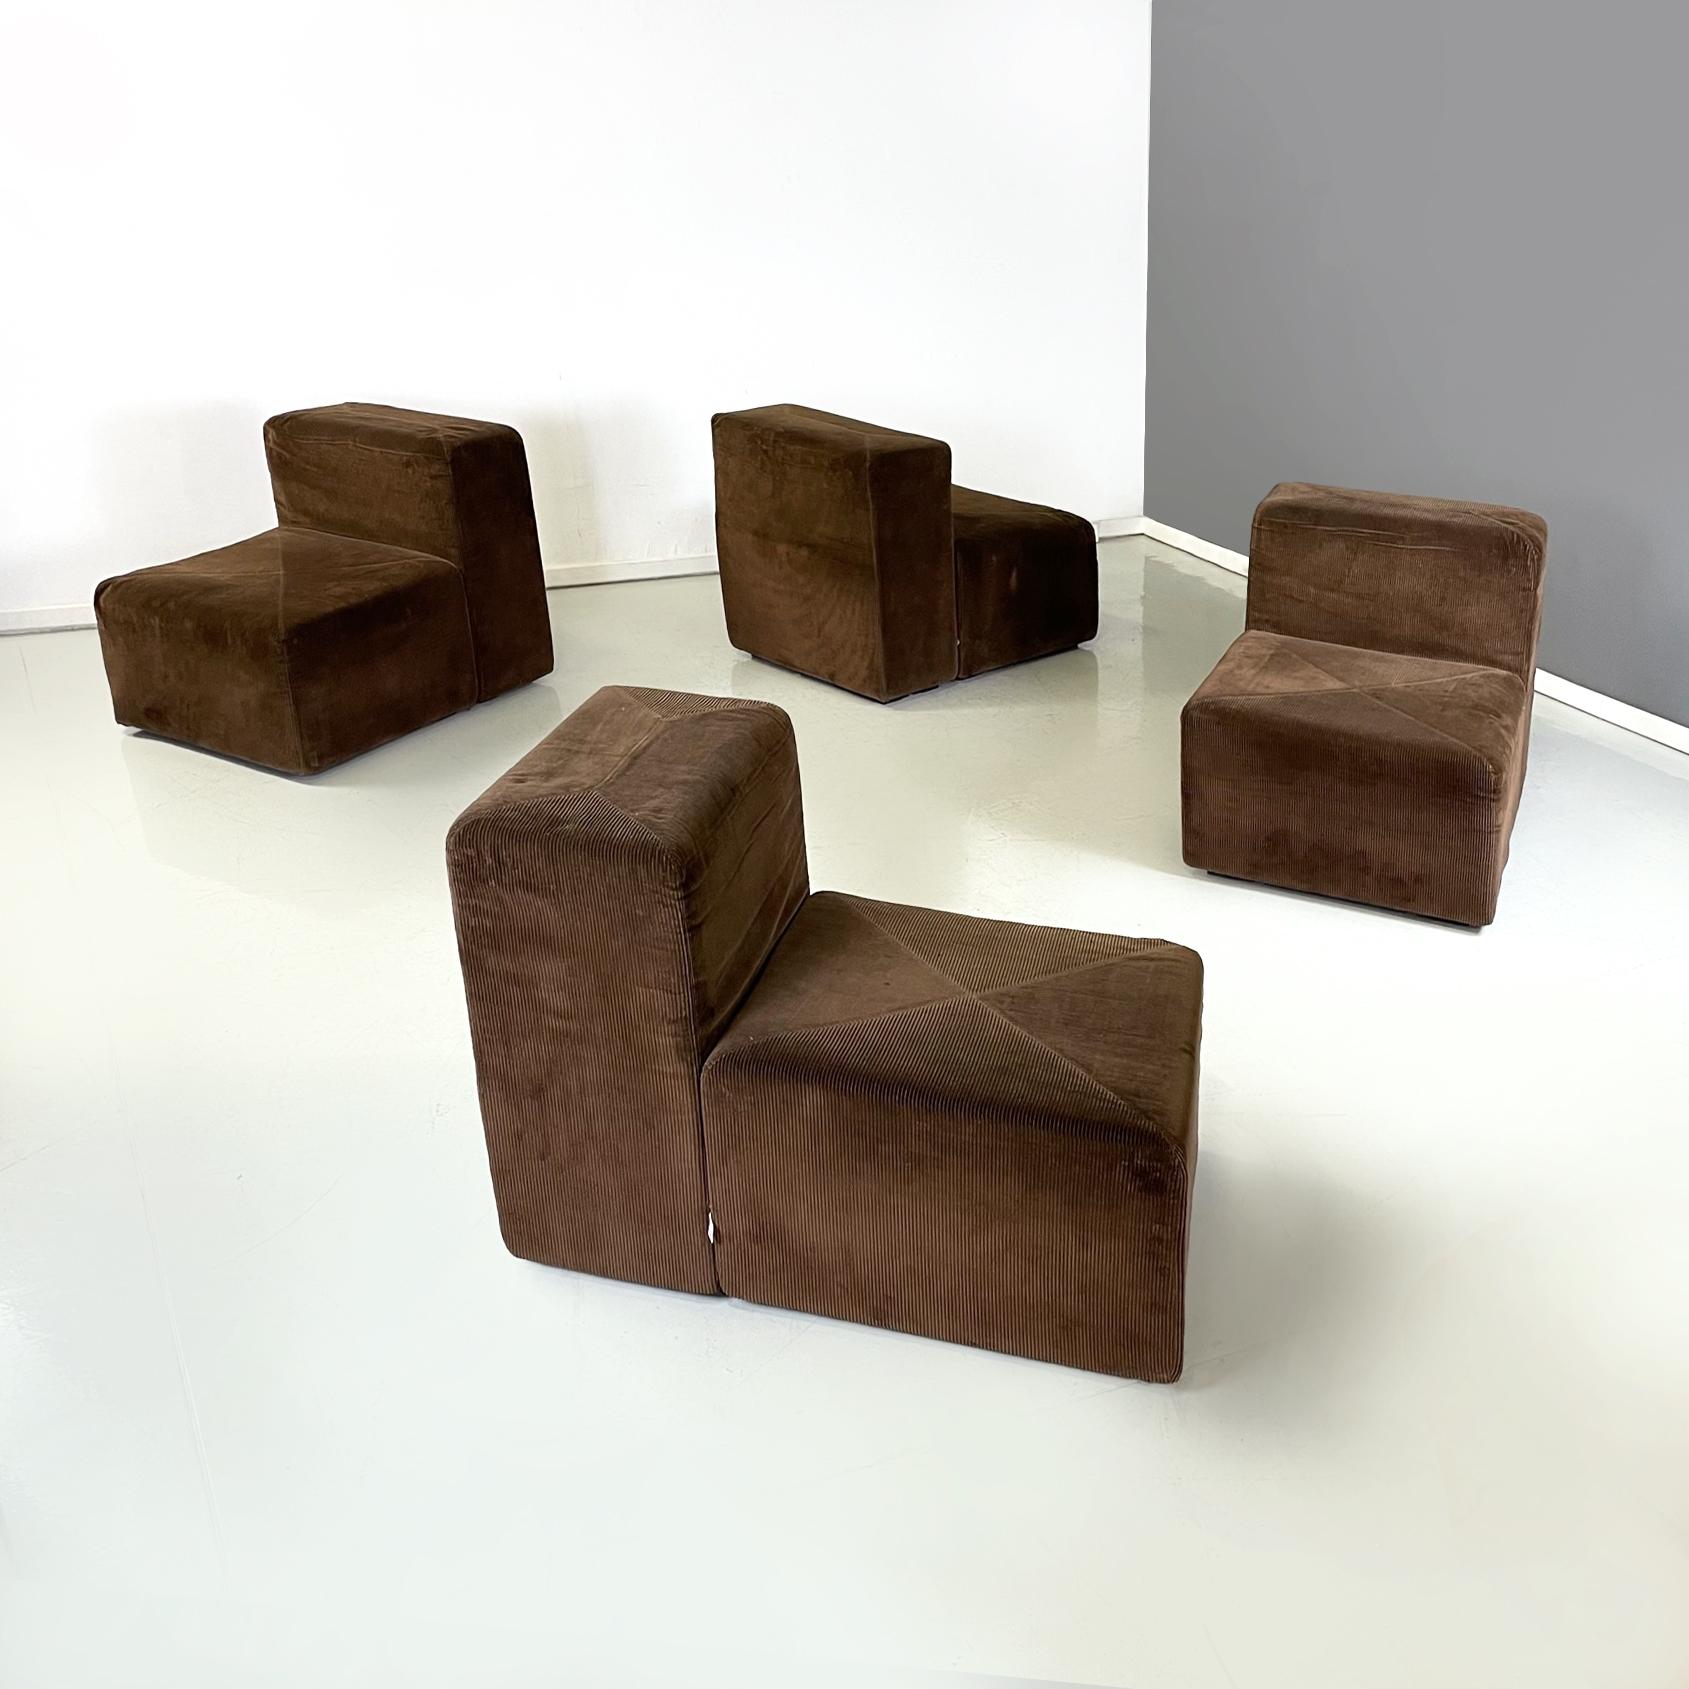 Italian modern Modular sofa Sistema 61 by Giancarlo Piretti for Anonima Castelli, 1970s
Modular sofa mod. Sistema 61 with squared seat and back, entirely padded and covered in brown corduroy velvet. Internal structure in black plastic. The 4 seats